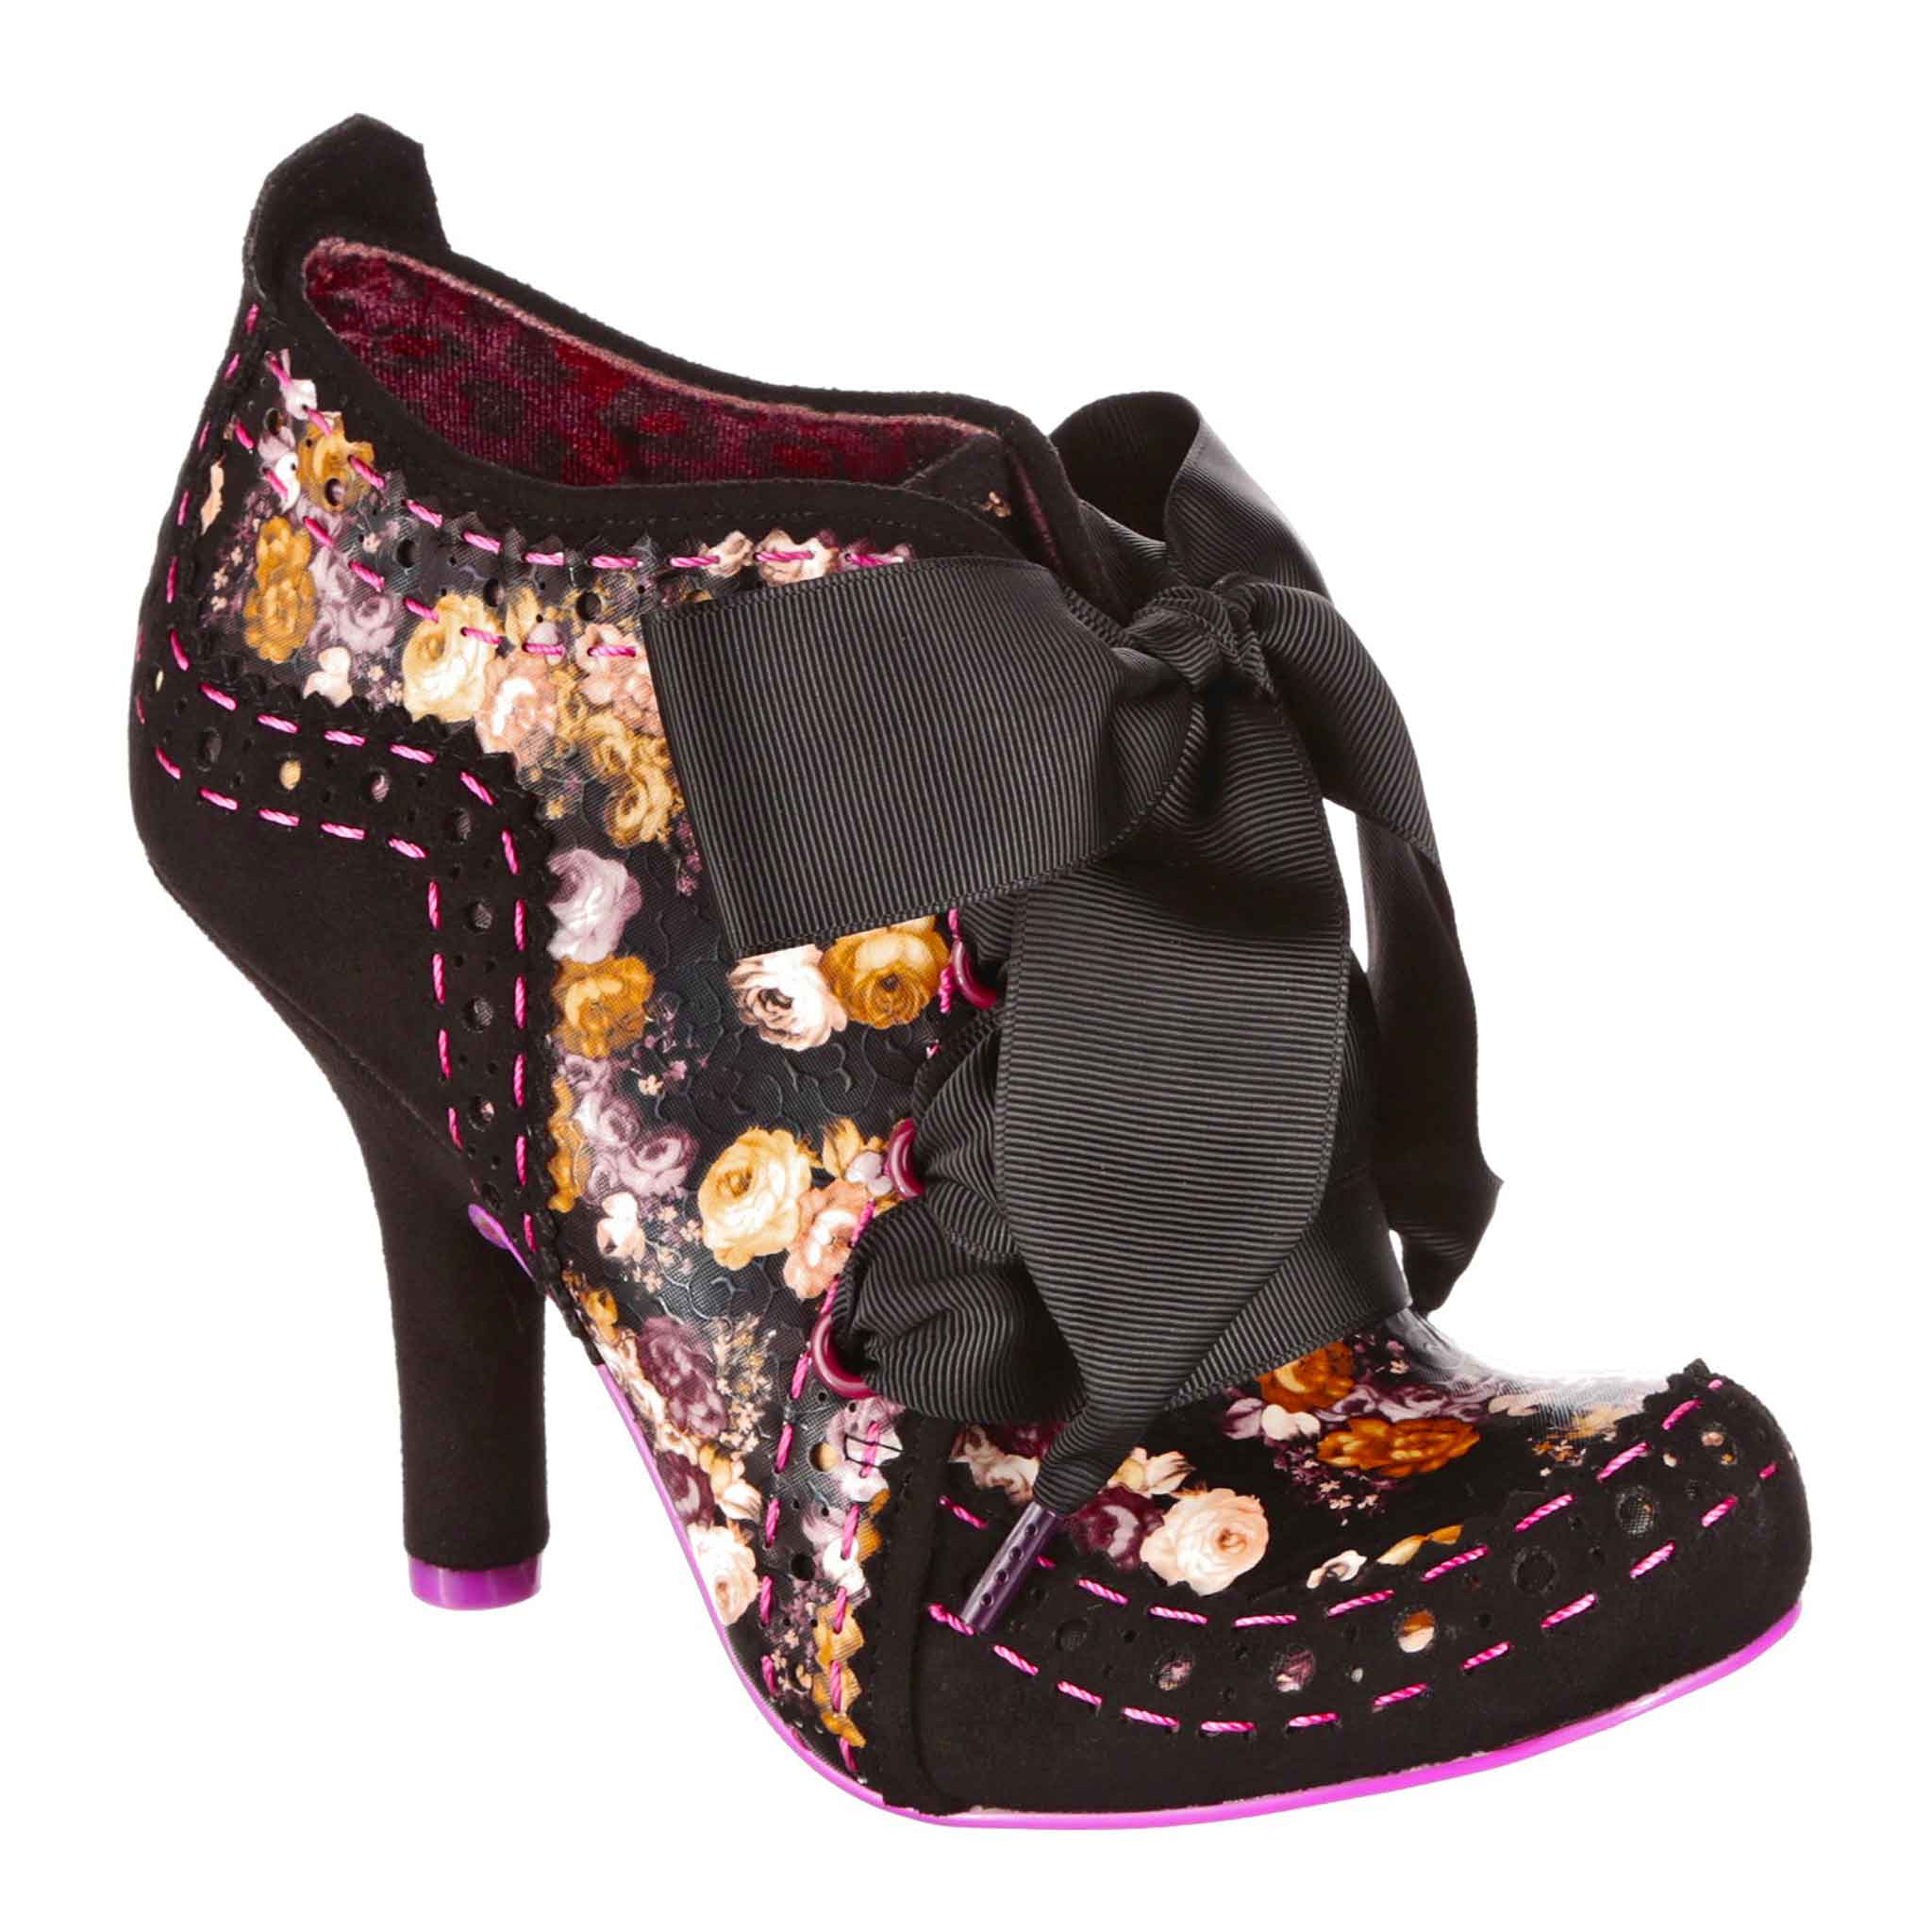 Irregular Choice Banjo Time Women's Mid Heel Shoes With Bow In